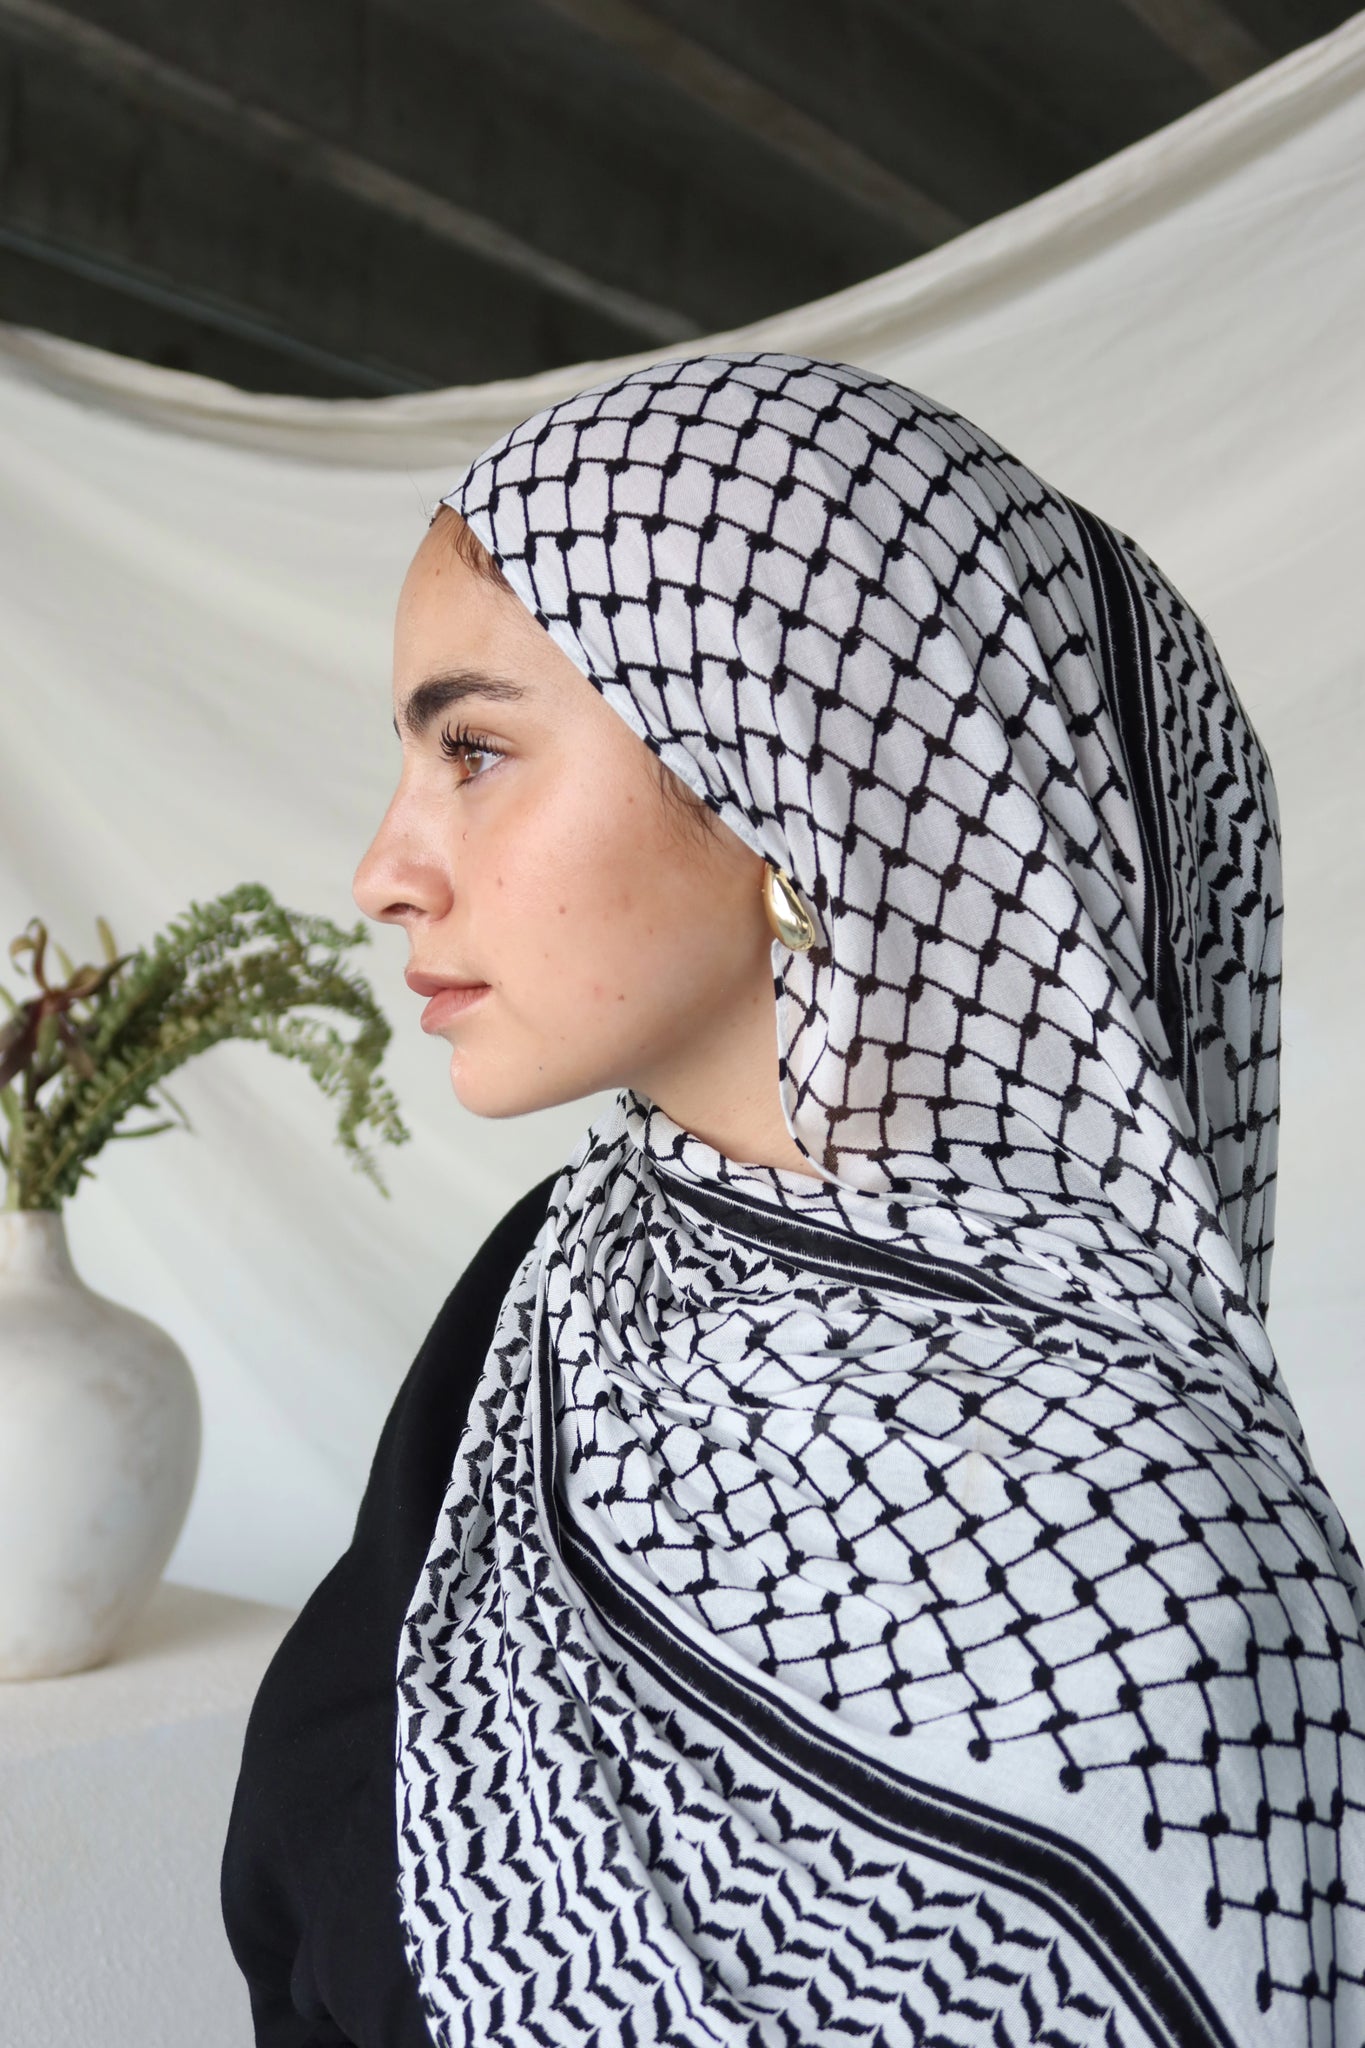 Elevate Your Style with Vela's Black Kuffiyeh Print Scarves